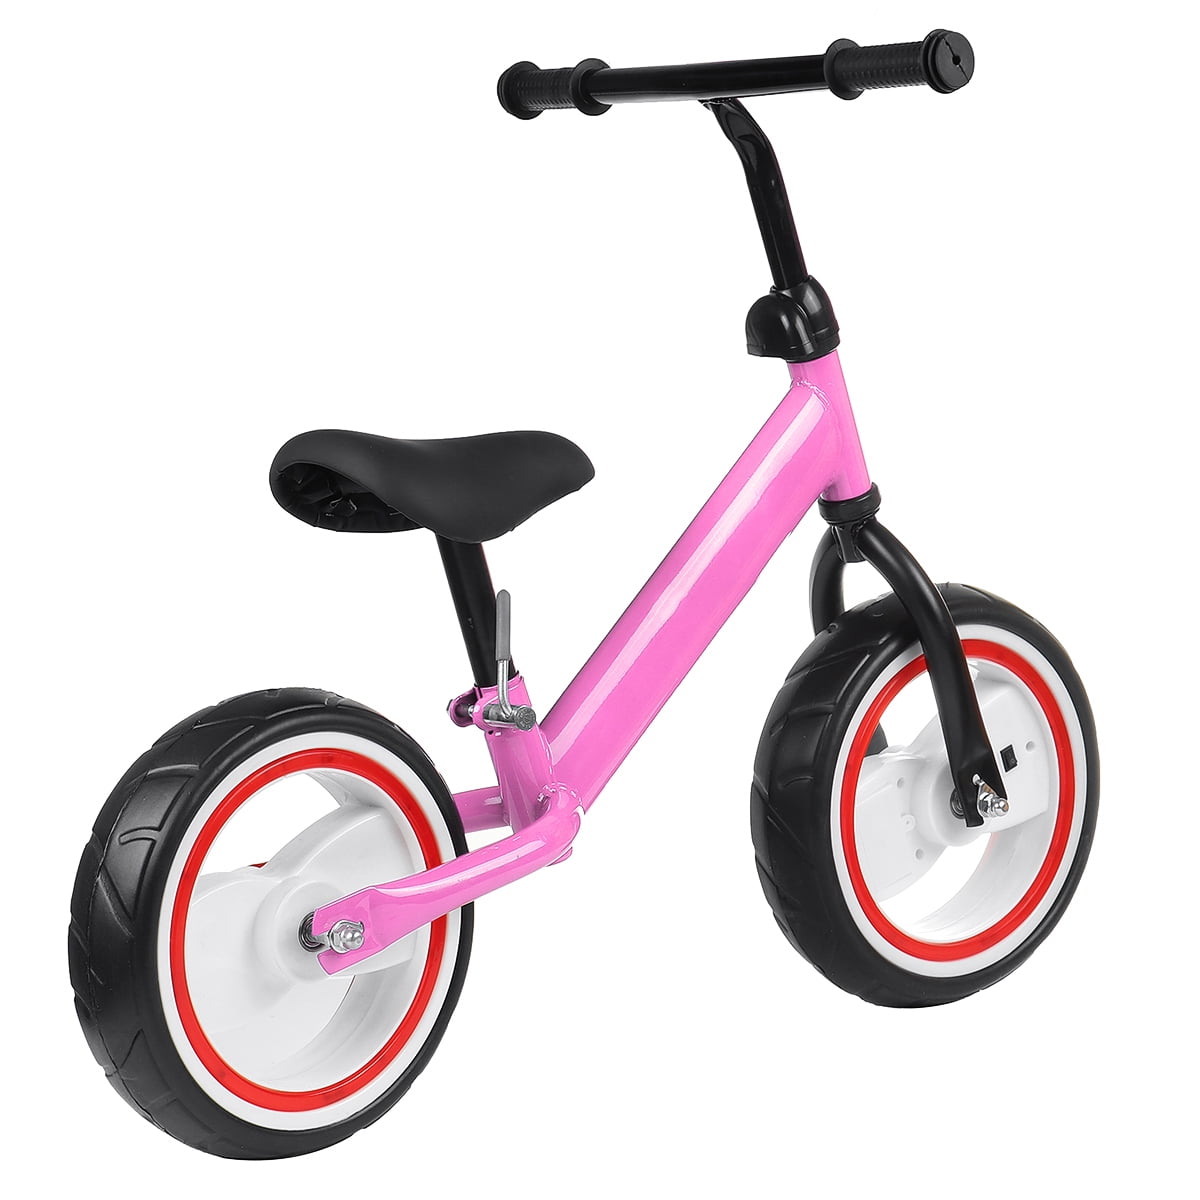 Ranrule Balance Bike for Kids and Toddlers,Lightweight No Pedal Sport Training Bicycle for Boys and Girls,Age 18 Months,2,3,4,5 Year Old,Pink 